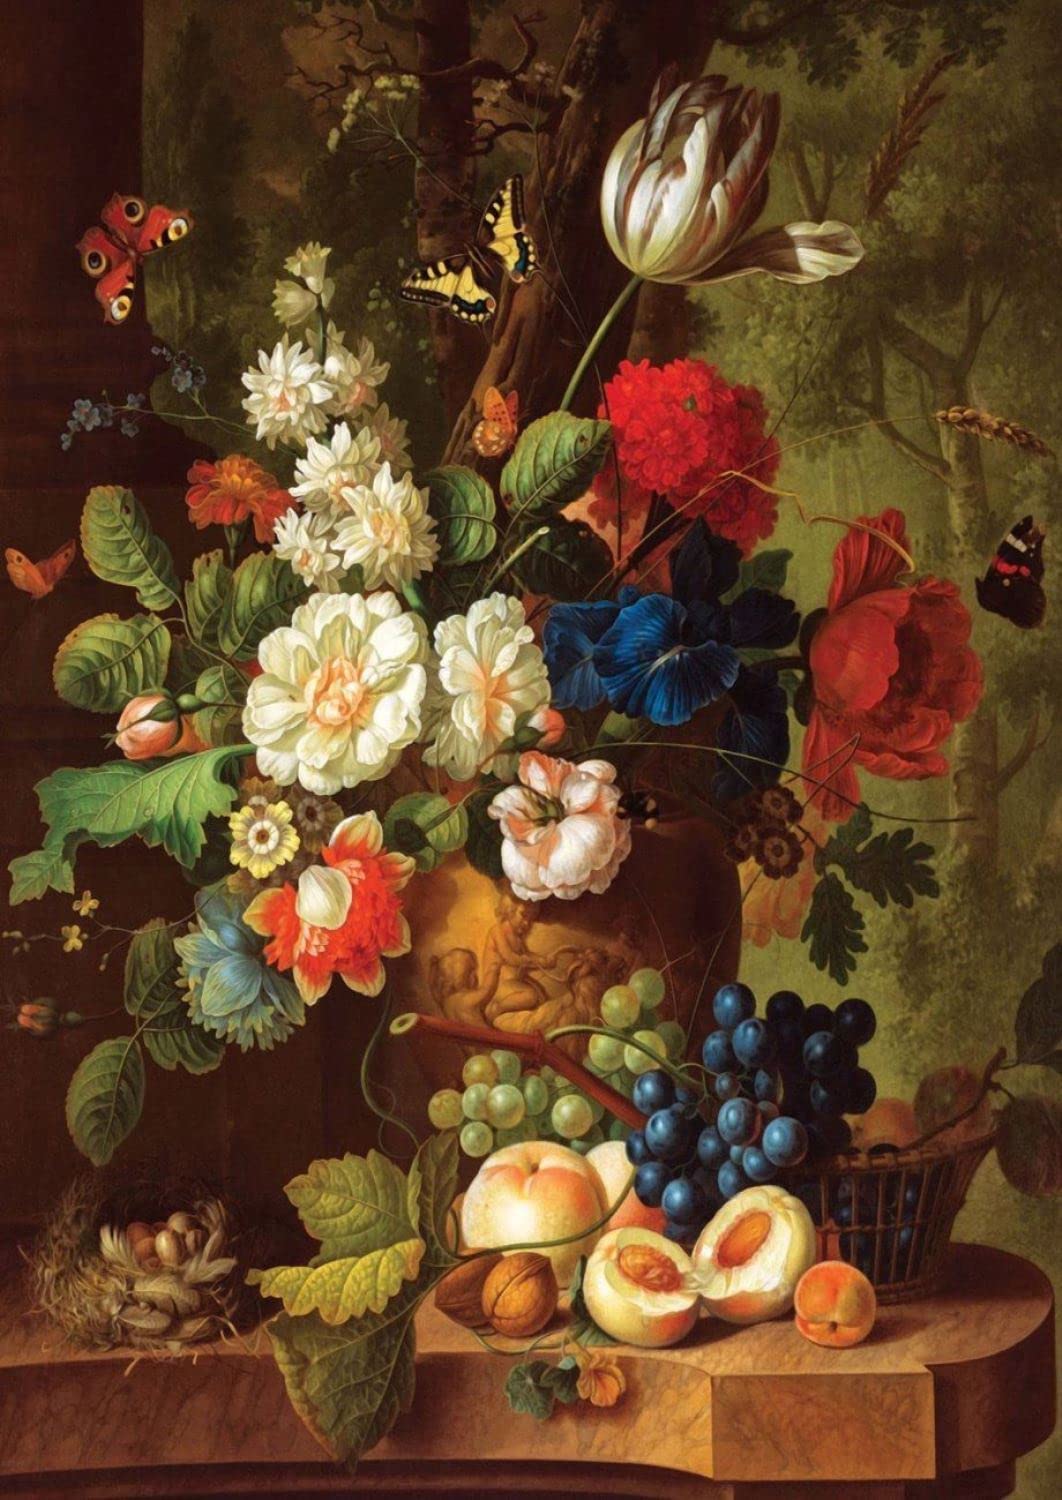 Nova Puzzle Flowers and Fruits Still Life 2000 Teile Puzzle Nova-Puzzle-46008 von Nova Puzzle